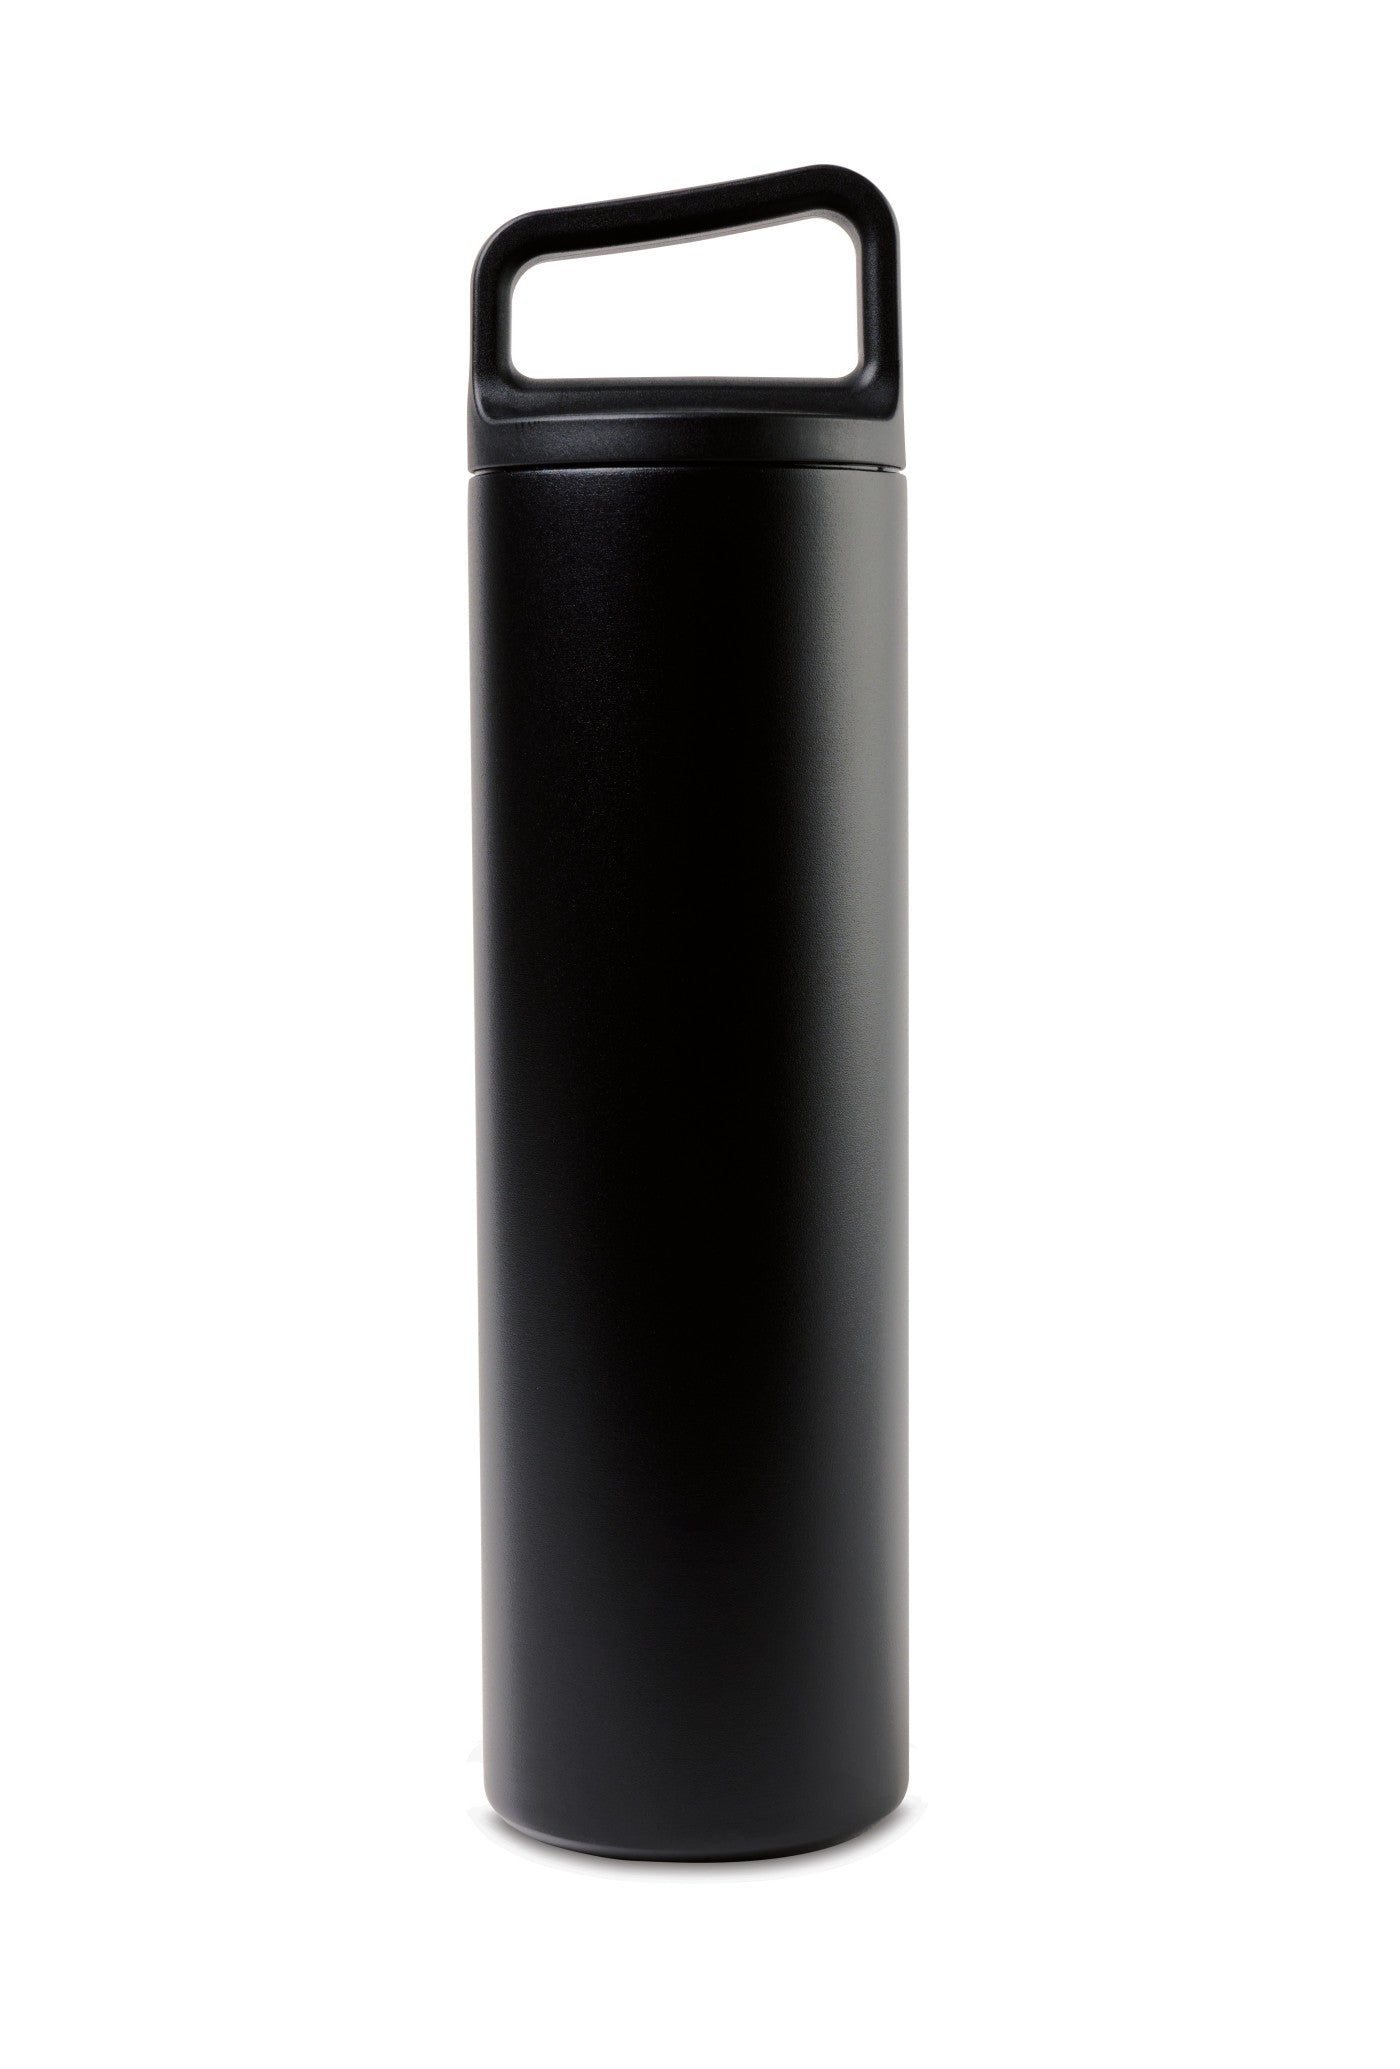 Customizable Miir® Climate+ 20 oz Wide-Mouth Bottle in black powder.